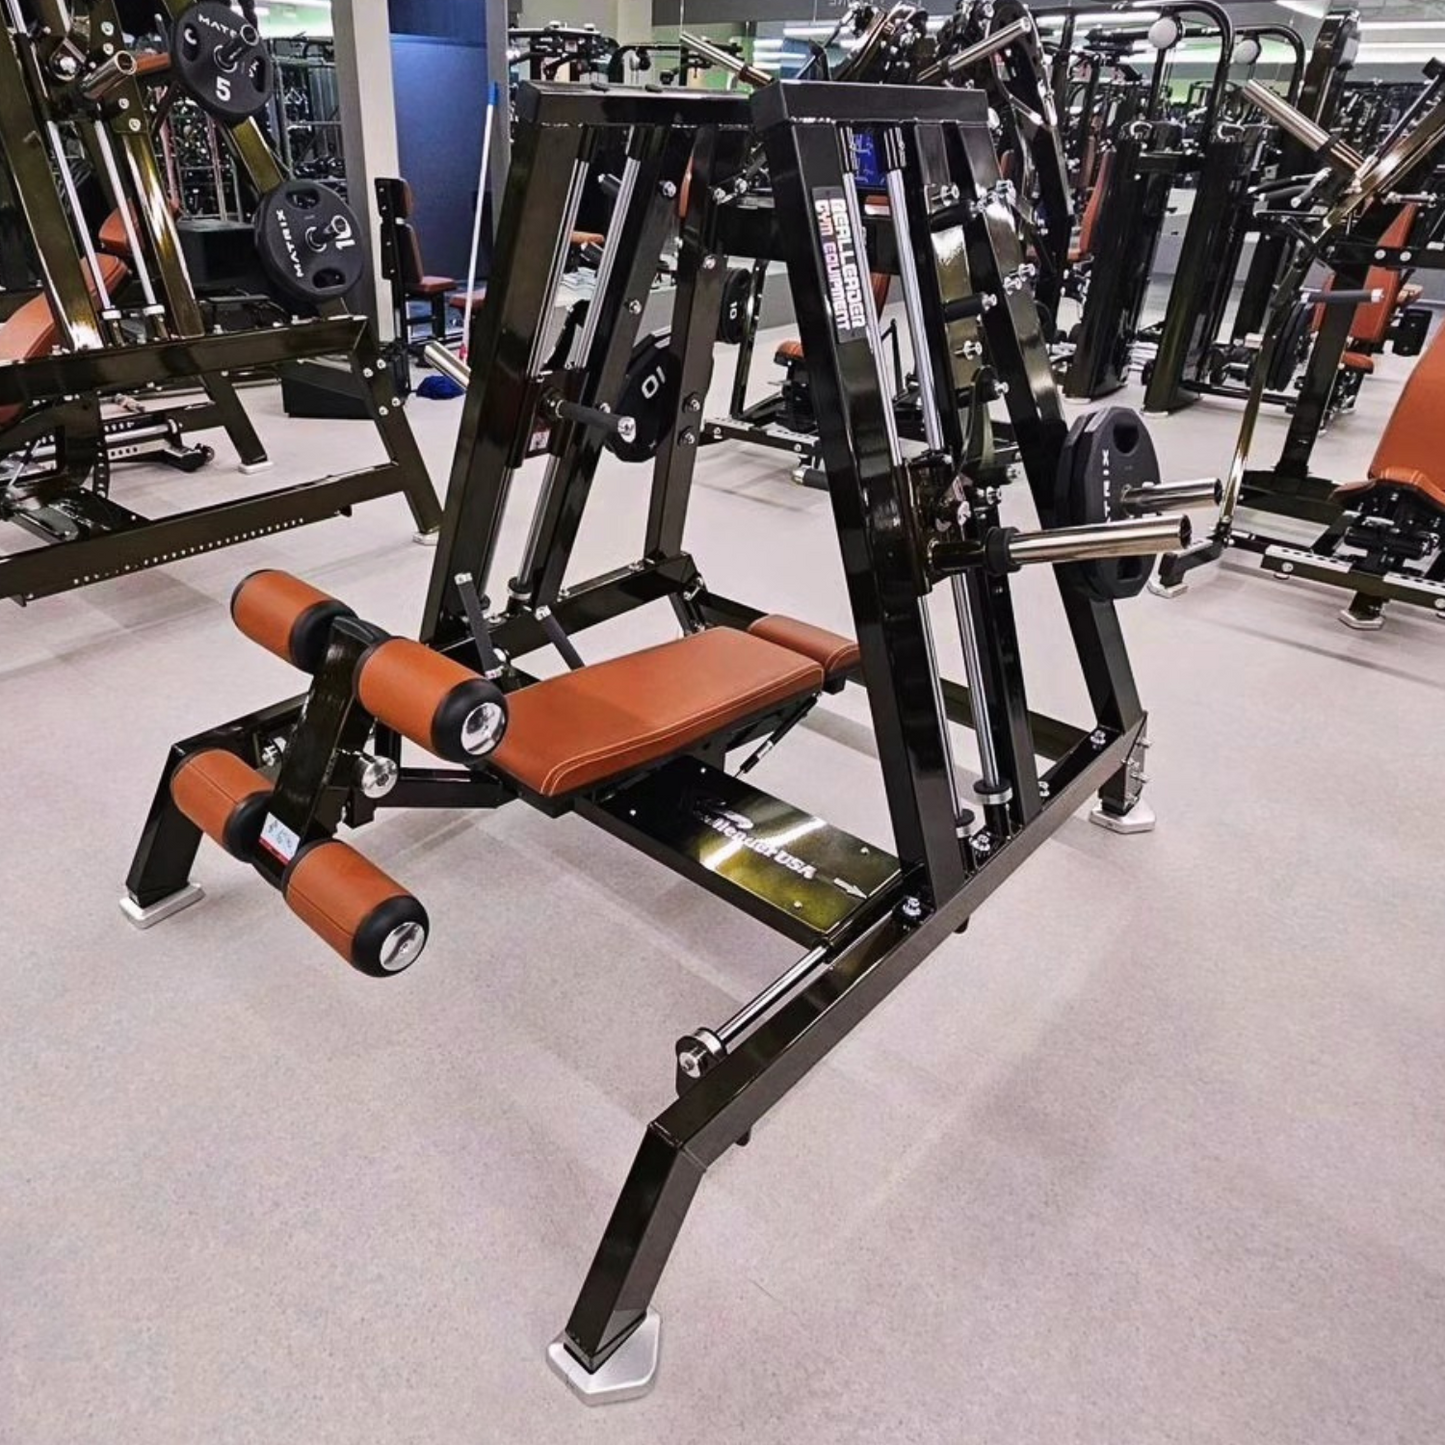 Realleader USA XRHSPRO1007 Commercial Power Smith Machine Dual System